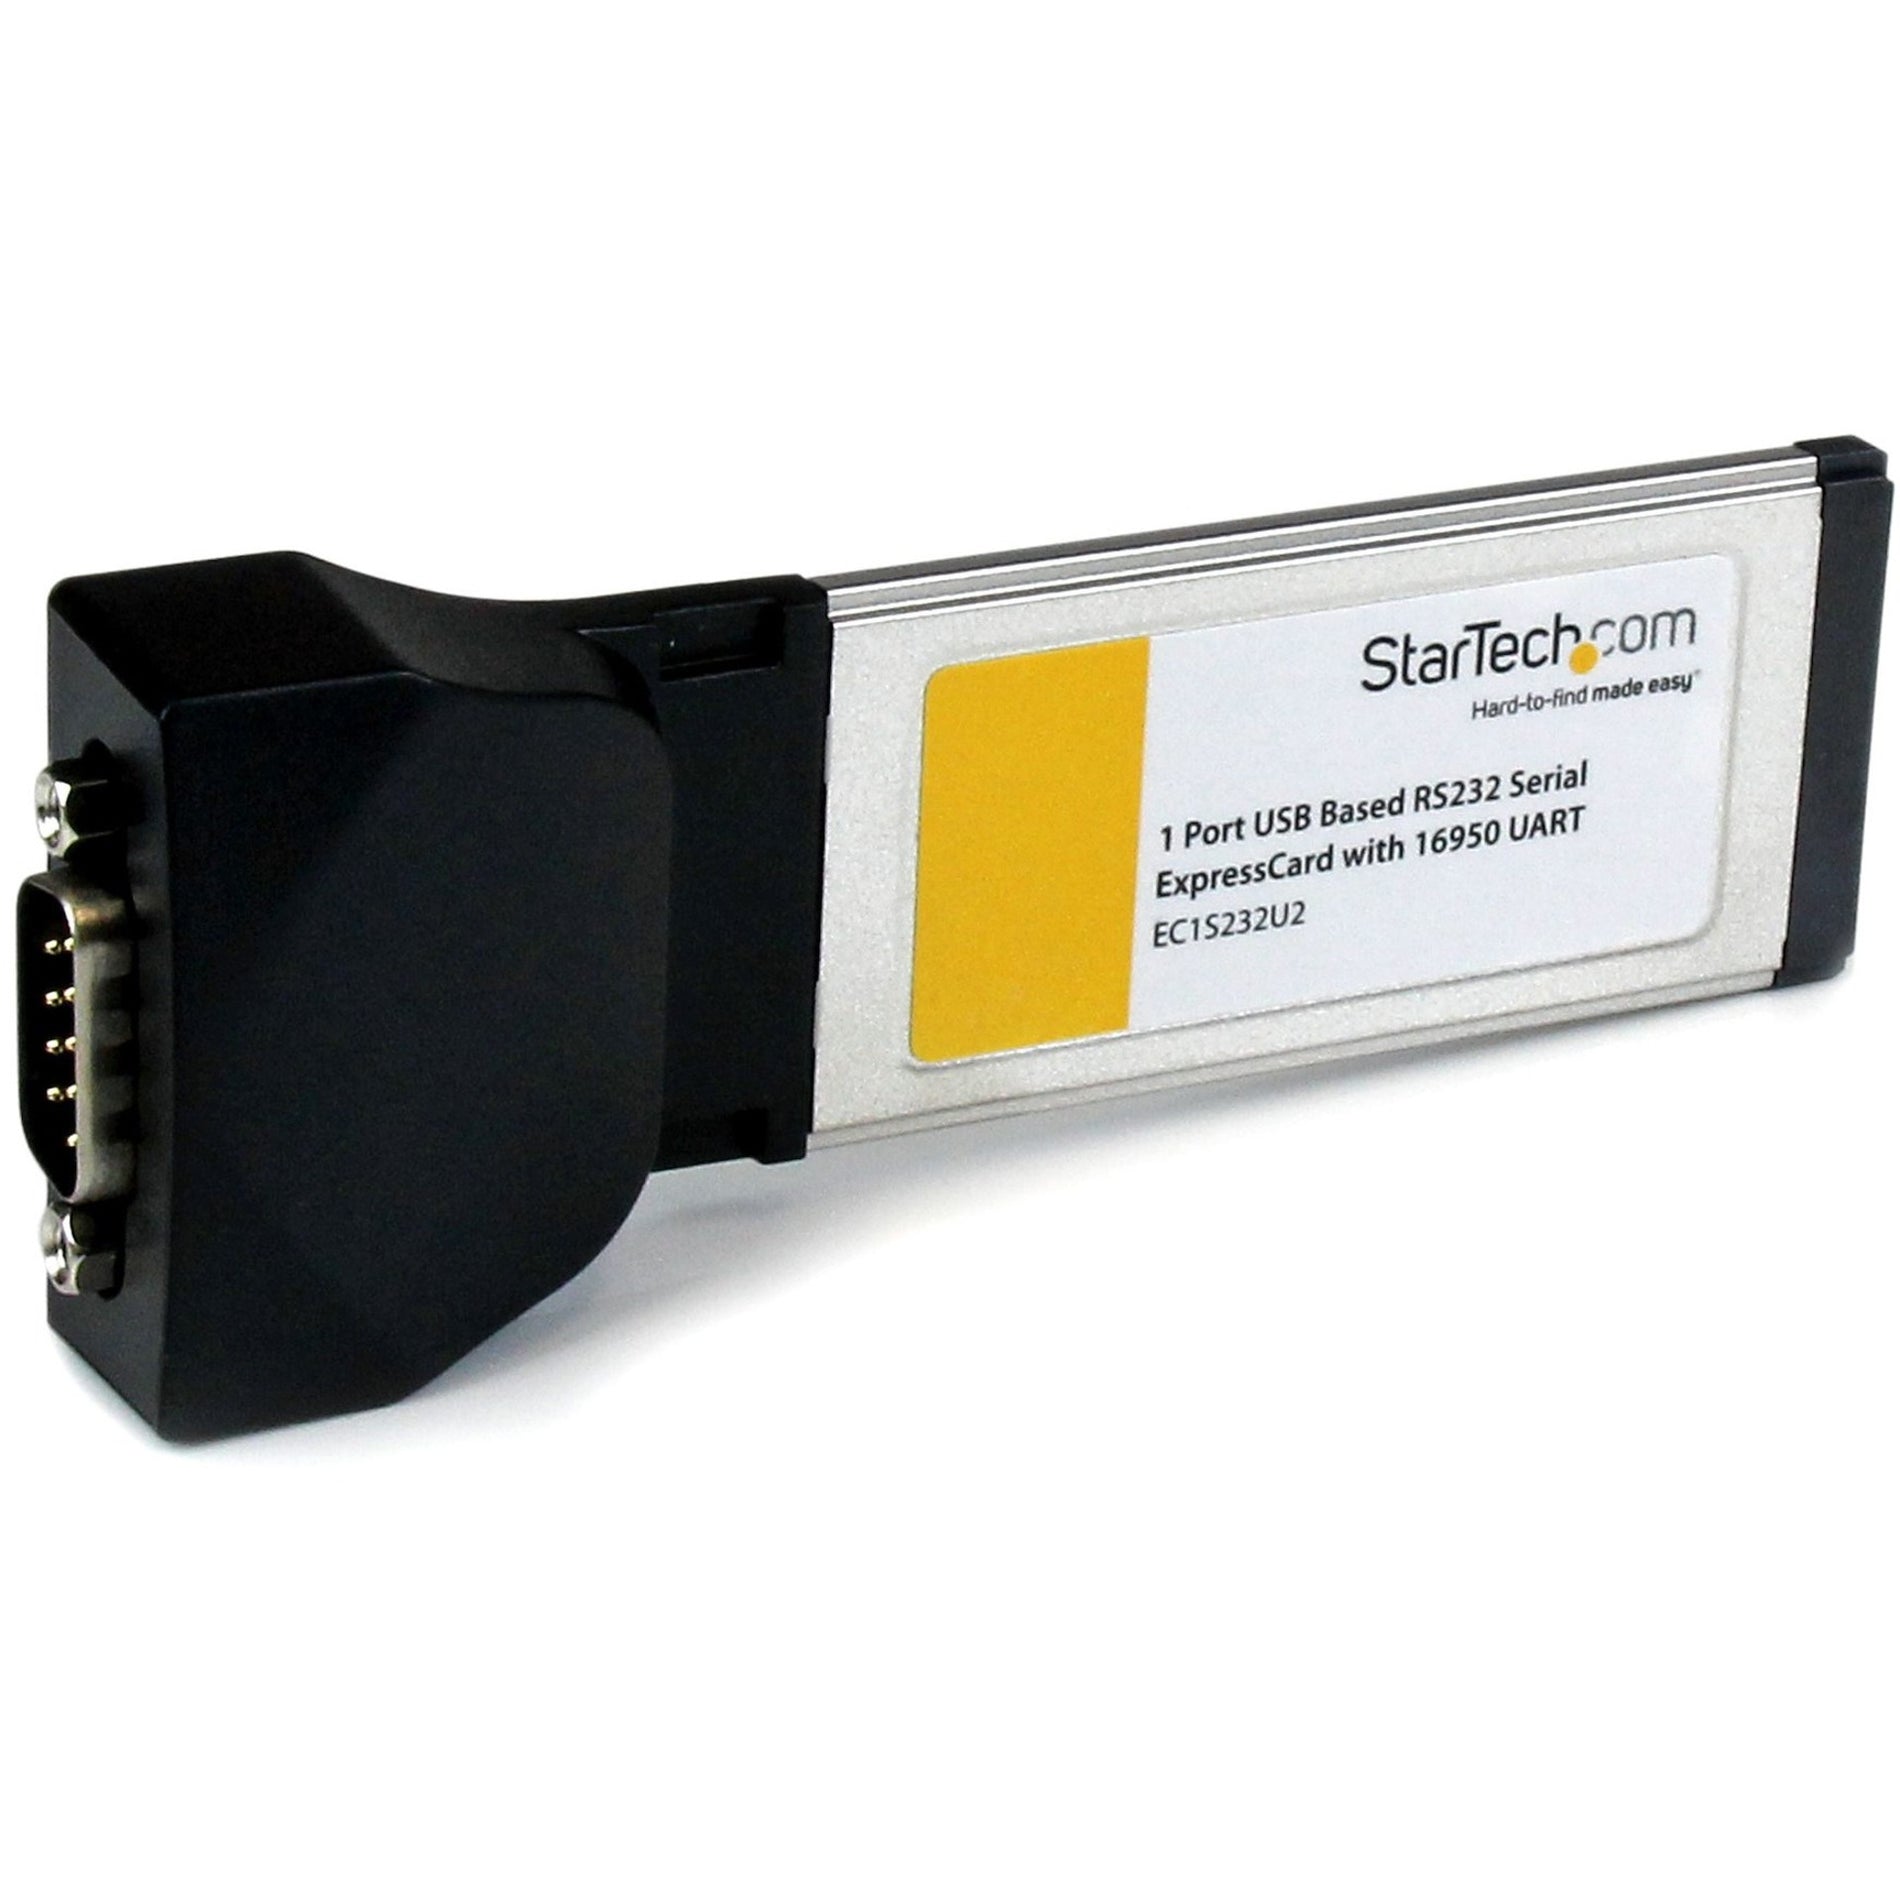 StarTech.com EC1S232U2 1 Port ExpressCard to RS232 DB9 Serial Adapter Card w/ 16950 - USB Based, Plug & Play, Up to 460.8kB/s